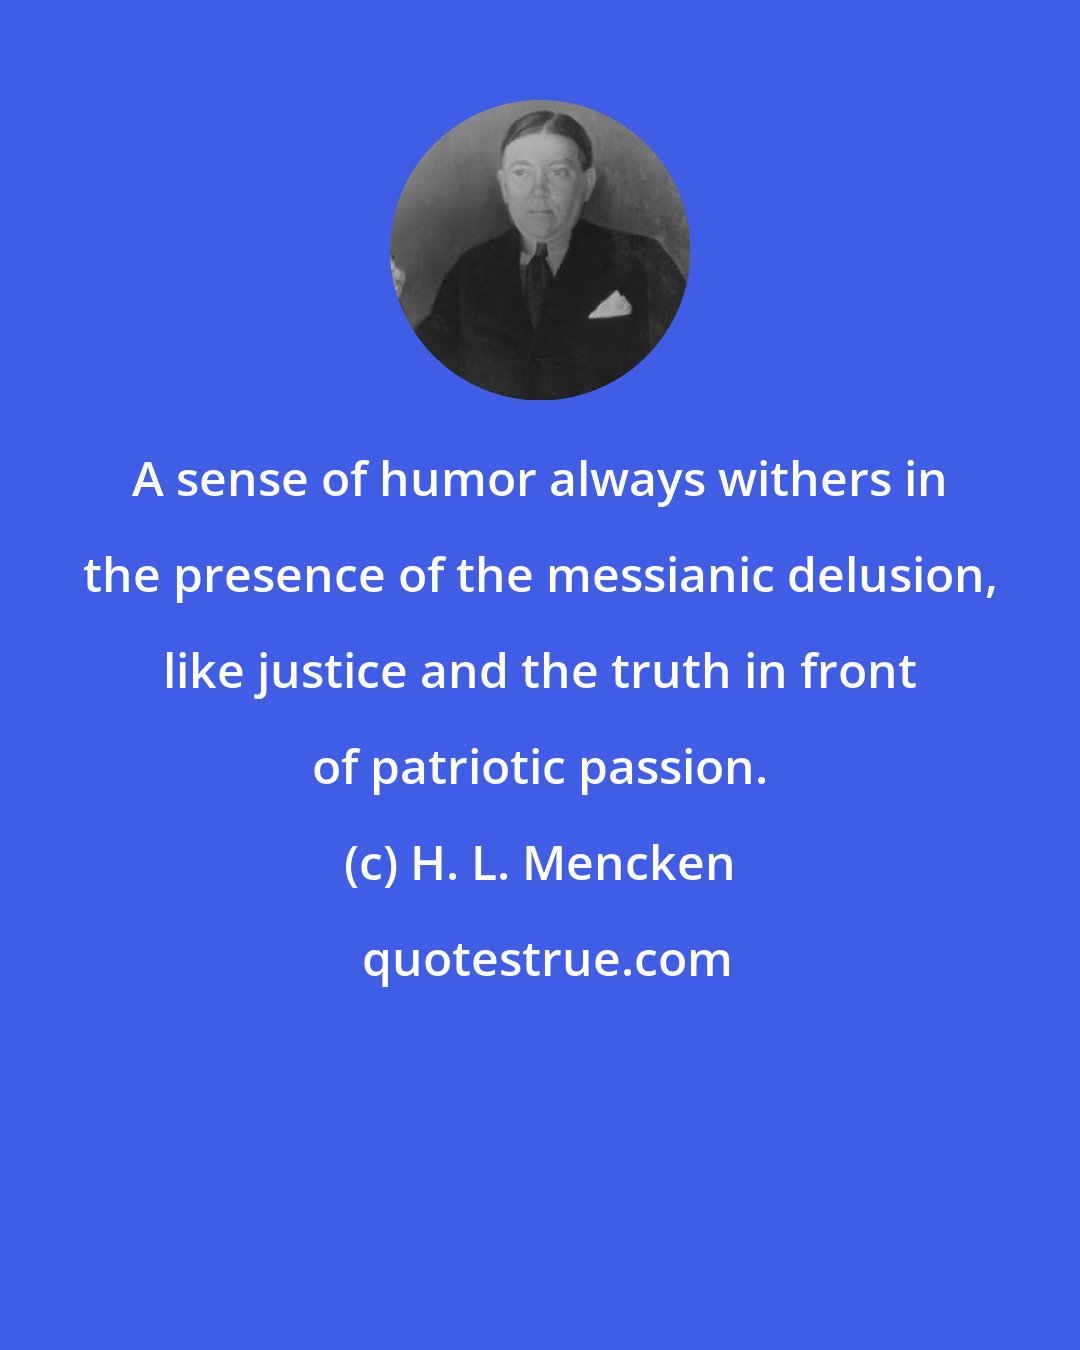 H. L. Mencken: A sense of humor always withers in the presence of the messianic delusion, like justice and the truth in front of patriotic passion.